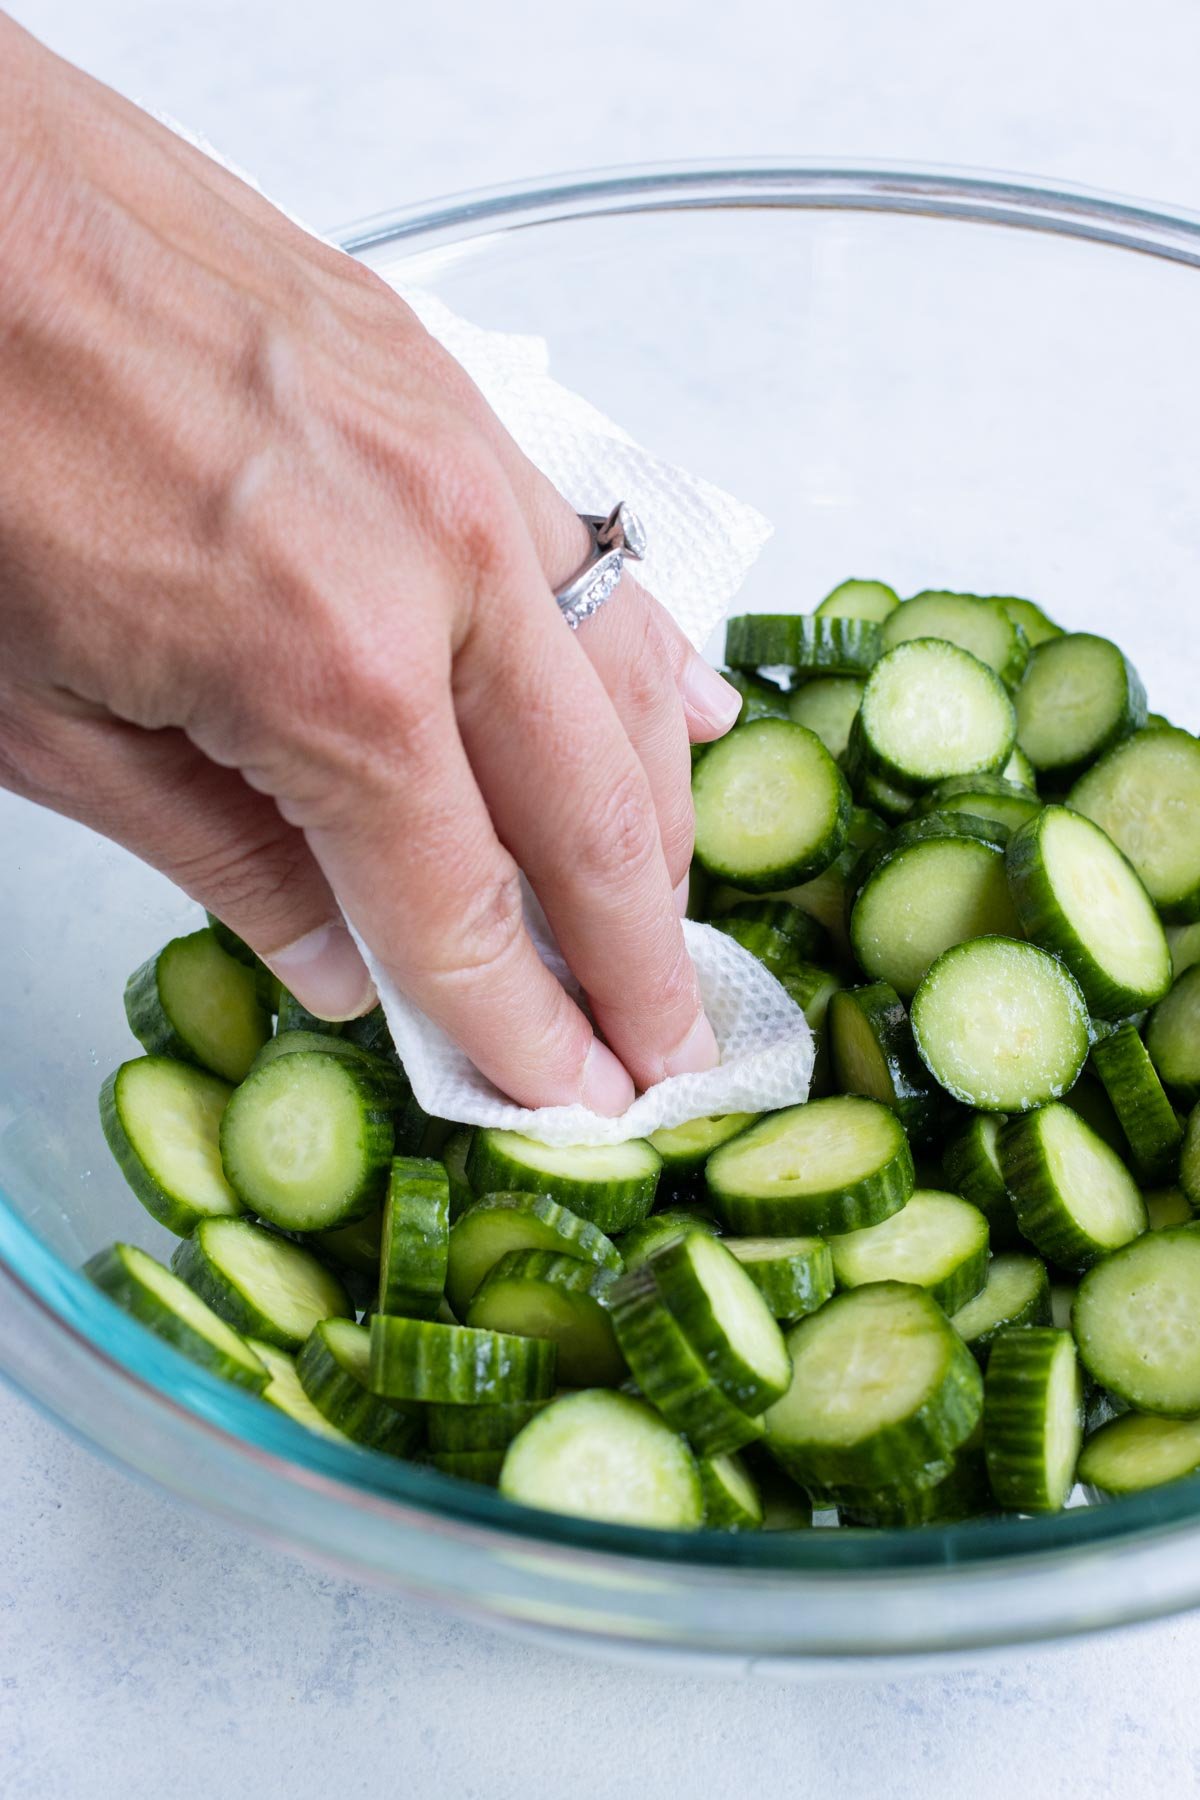 A paper towel is used to remove excess moisture from sliced cucumbers.